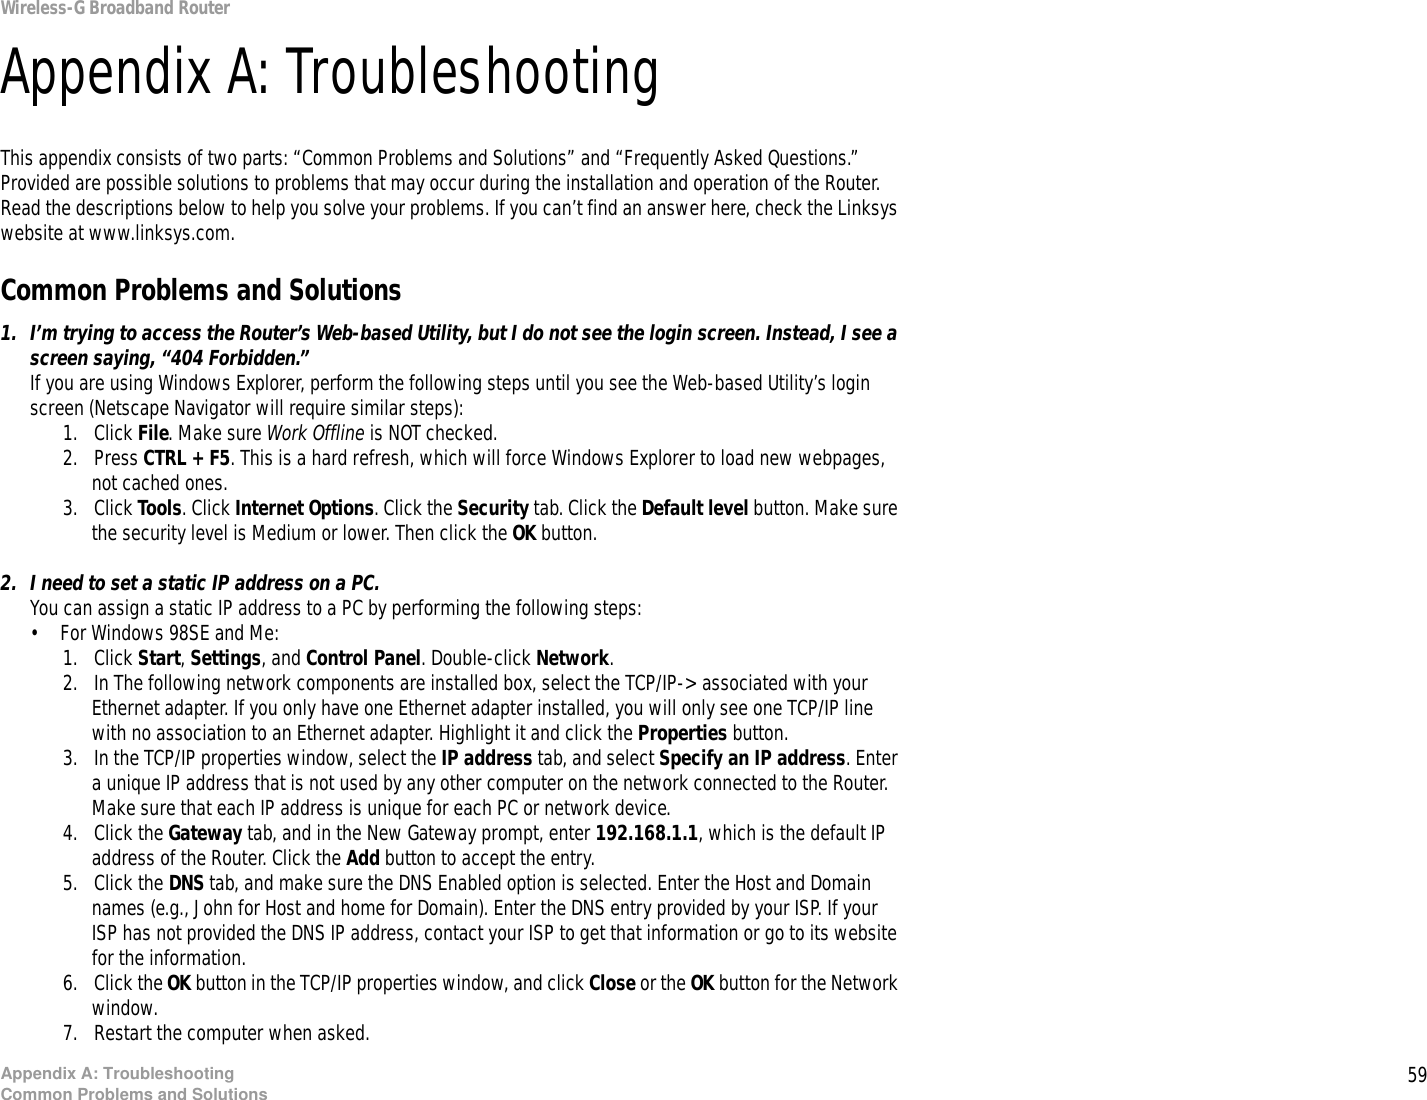 59Appendix A: TroubleshootingCommon Problems and SolutionsWireless-G Broadband RouterAppendix A: TroubleshootingThis appendix consists of two parts: “Common Problems and Solutions” and “Frequently Asked Questions.” Provided are possible solutions to problems that may occur during the installation and operation of the Router. Read the descriptions below to help you solve your problems. If you can’t find an answer here, check the Linksys website at www.linksys.com.Common Problems and Solutions1. I’m trying to access the Router’s Web-based Utility, but I do not see the login screen. Instead, I see a screen saying, “404 Forbidden.”If you are using Windows Explorer, perform the following steps until you see the Web-based Utility’s login screen (Netscape Navigator will require similar steps):1. Click File. Make sure Work Offline is NOT checked.2. Press CTRL + F5. This is a hard refresh, which will force Windows Explorer to load new webpages, not cached ones.3. Click Tools. Click Internet Options. Click the Security tab. Click the Default level button. Make sure the security level is Medium or lower. Then click the OK button.2. I need to set a static IP address on a PC.You can assign a static IP address to a PC by performing the following steps:• For Windows 98SE and Me:1. Click Start, Settings, and Control Panel. Double-click Network.2. In The following network components are installed box, select the TCP/IP-&gt; associated with your Ethernet adapter. If you only have one Ethernet adapter installed, you will only see one TCP/IP line with no association to an Ethernet adapter. Highlight it and click the Properties button.3. In the TCP/IP properties window, select the IP address tab, and select Specify an IP address. Enter a unique IP address that is not used by any other computer on the network connected to the Router. Make sure that each IP address is unique for each PC or network device.4. Click the Gateway tab, and in the New Gateway prompt, enter 192.168.1.1, which is the default IP address of the Router. Click the Add button to accept the entry.5. Click the DNS tab, and make sure the DNS Enabled option is selected. Enter the Host and Domain names (e.g., John for Host and home for Domain). Enter the DNS entry provided by your ISP. If your ISP has not provided the DNS IP address, contact your ISP to get that information or go to its website for the information.6. Click the OK button in the TCP/IP properties window, and click Close or the OK button for the Network window.7. Restart the computer when asked.